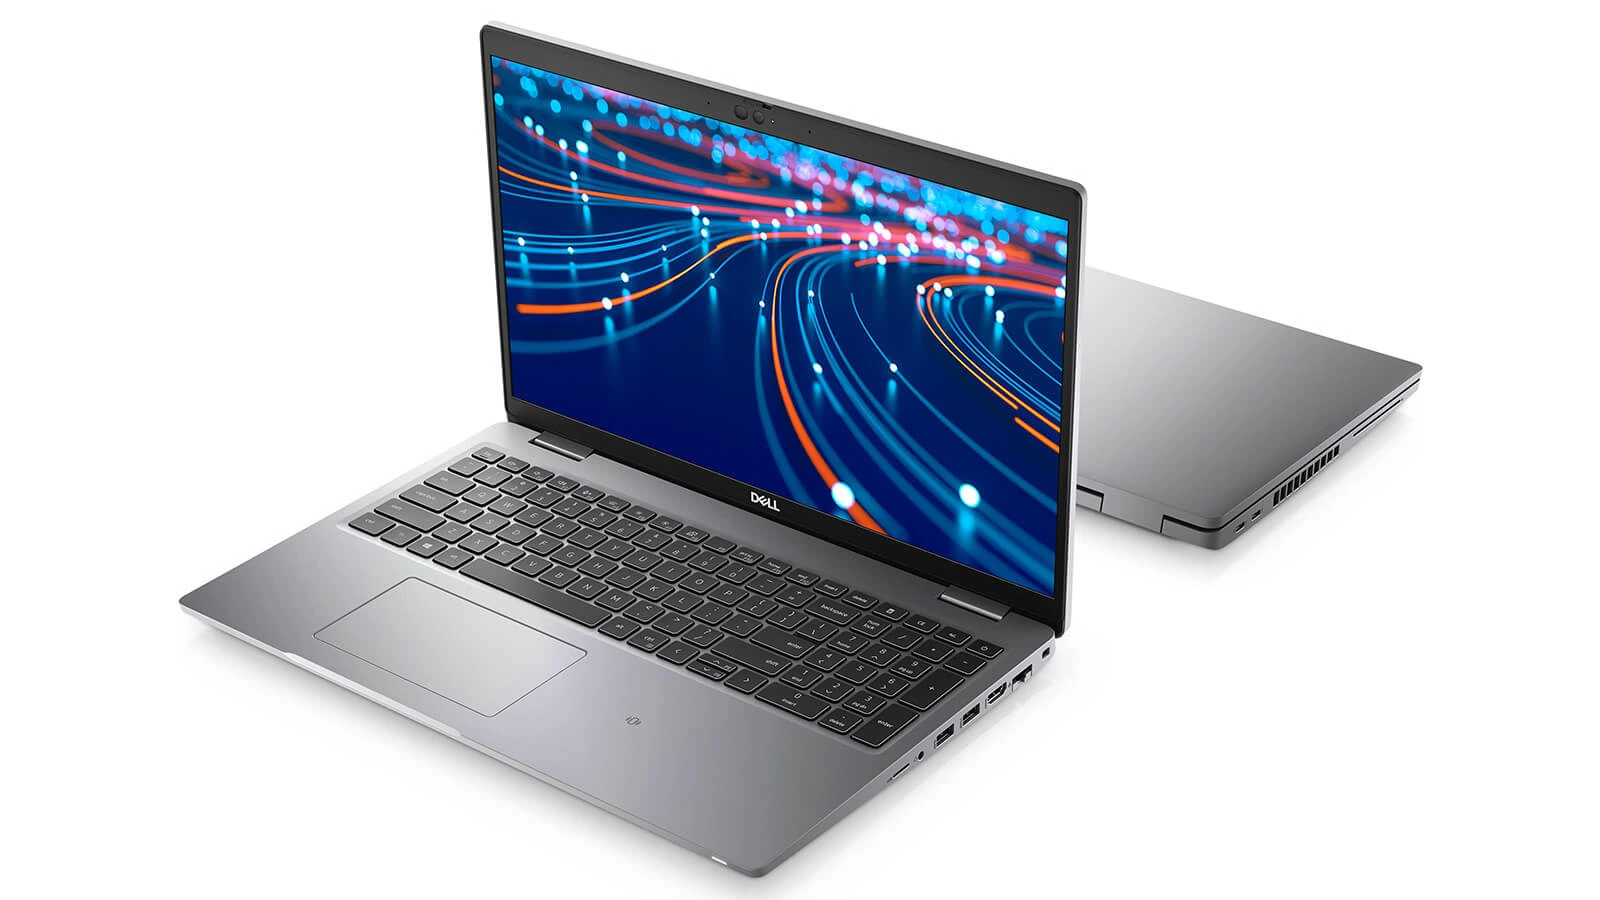 Dell Latitude 5520 Features 01